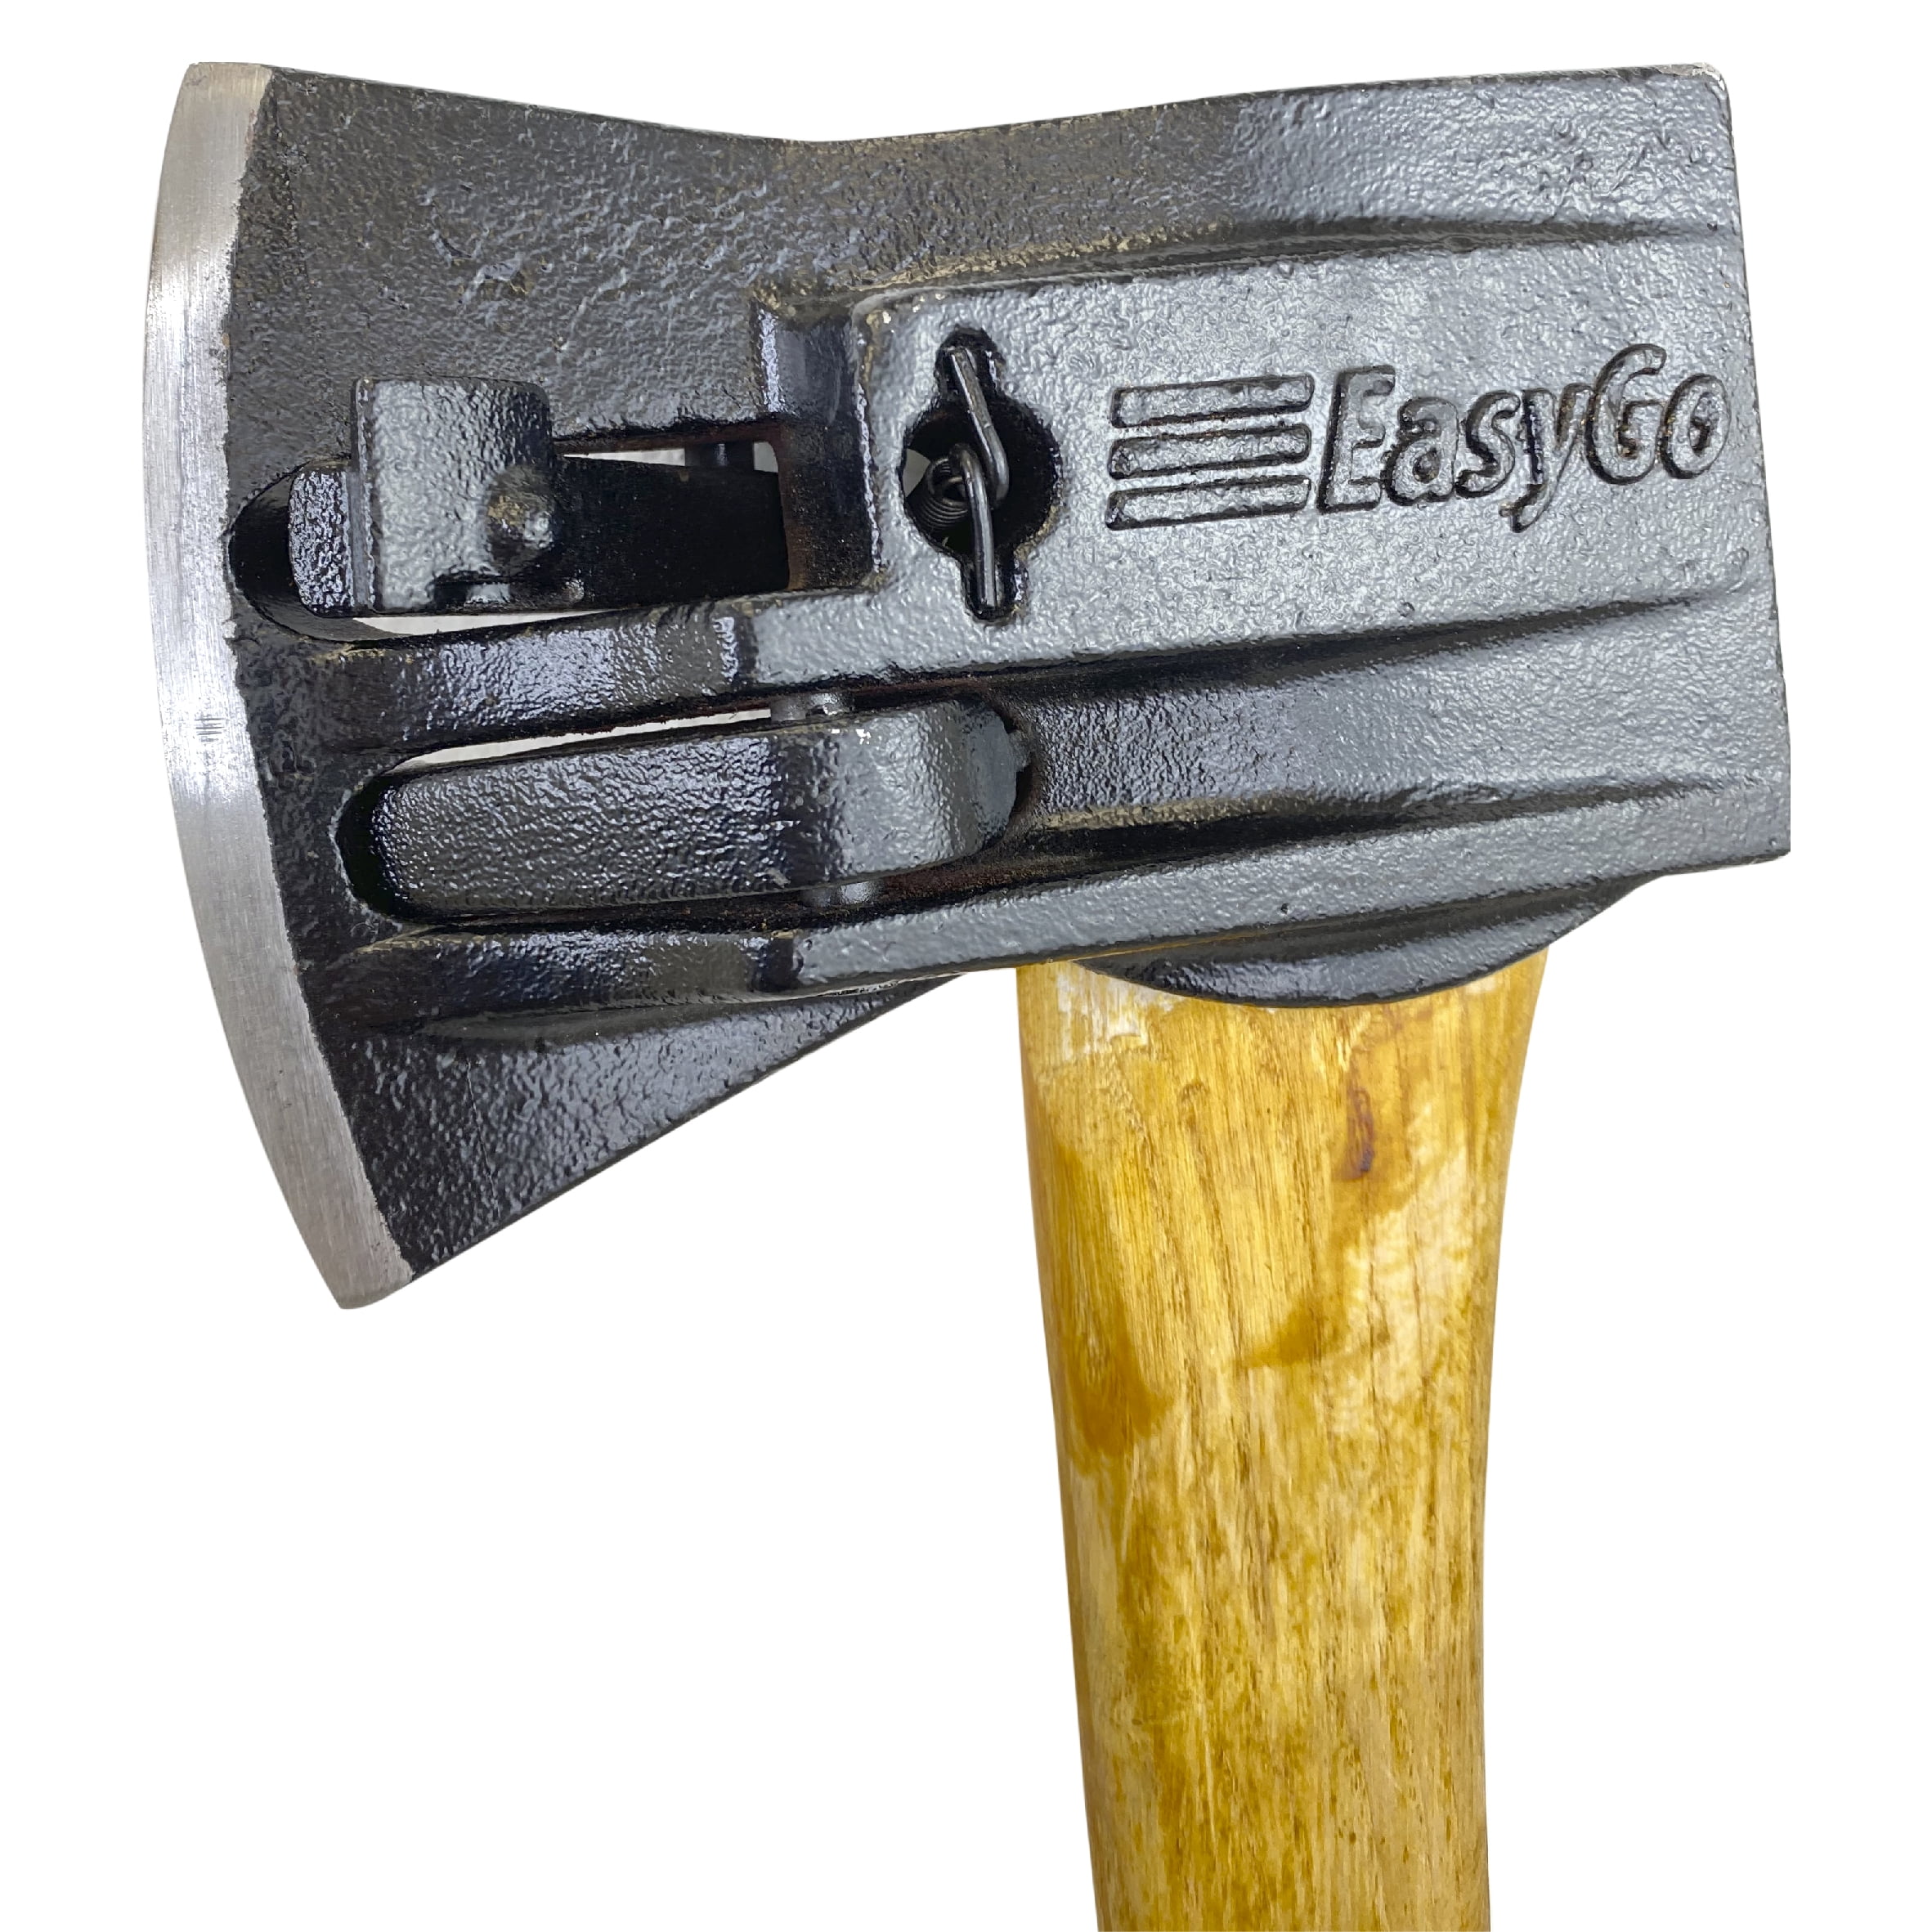 Chopper Wooden Axe - # 1 Splitting Maul Axe – Powerful Log Splitting Action – Spring Activated Levers Separate – 6.25# Cast Iron Head 32” Hickory Handle – Great for Camping, Stoves and Fir - Walmart.com